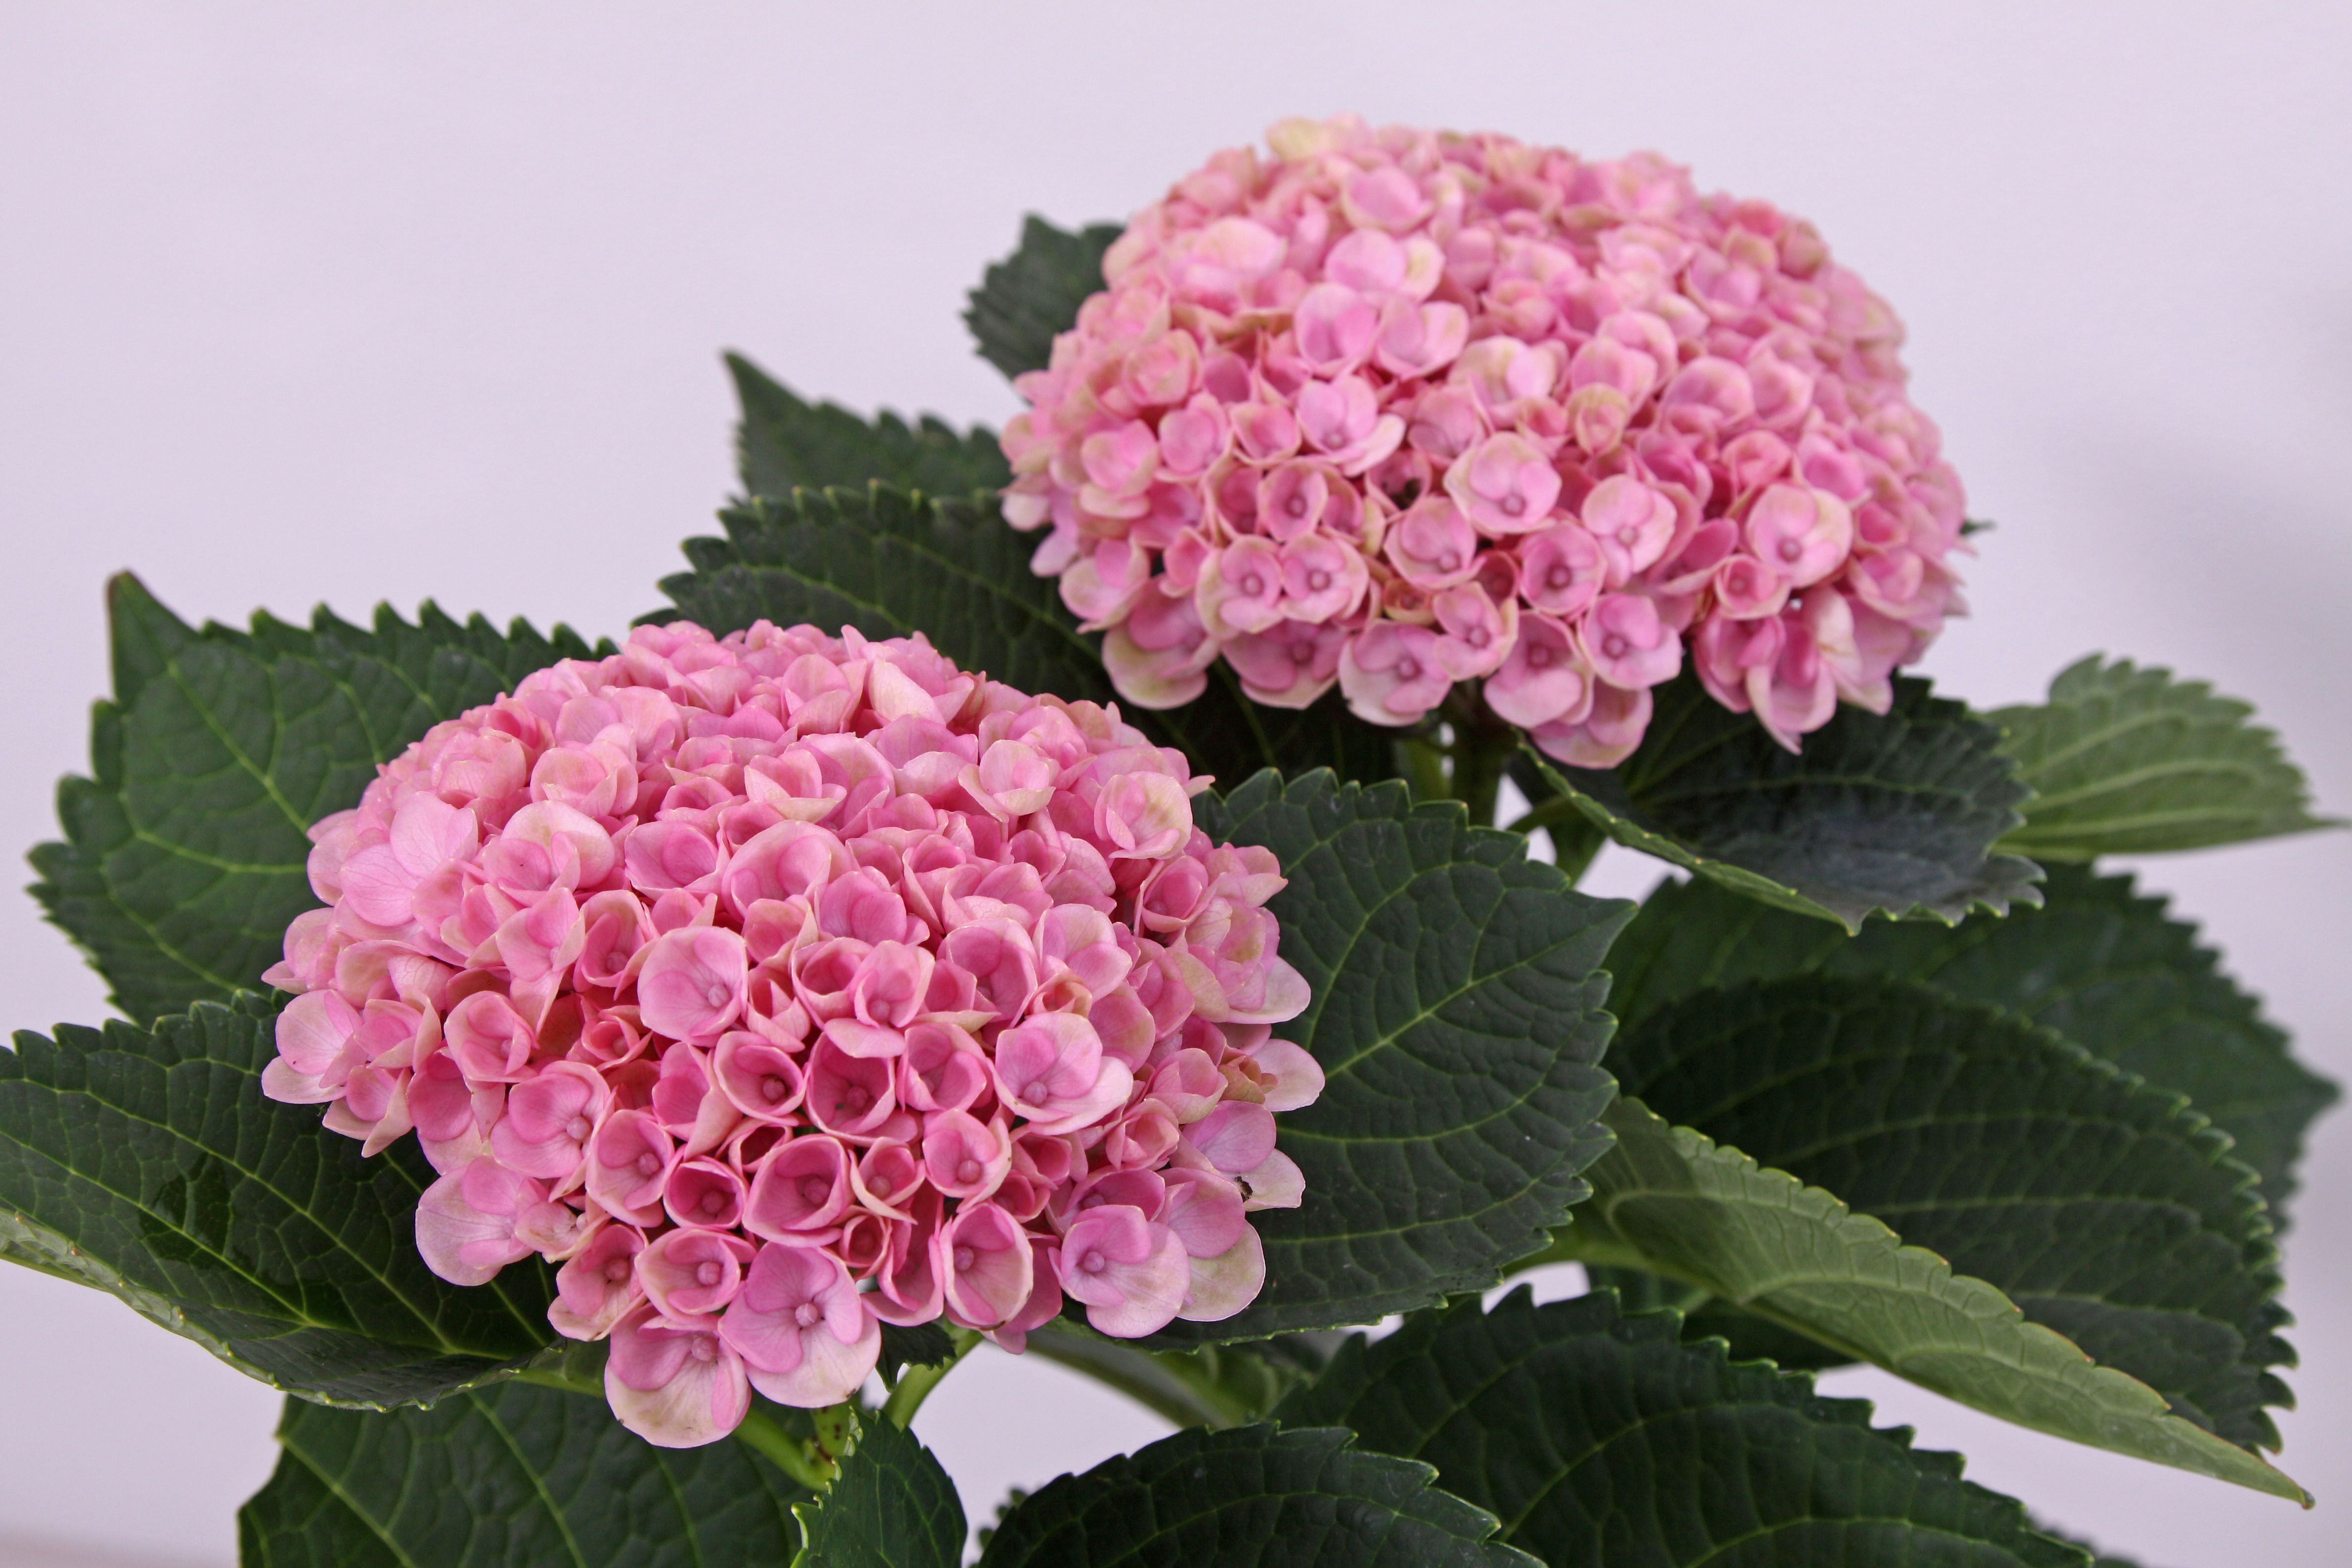 images/plants/hydrangea/hyd-magical-everlasting-revolution/hyd-magical-everlasting-revolution-0003.jpg